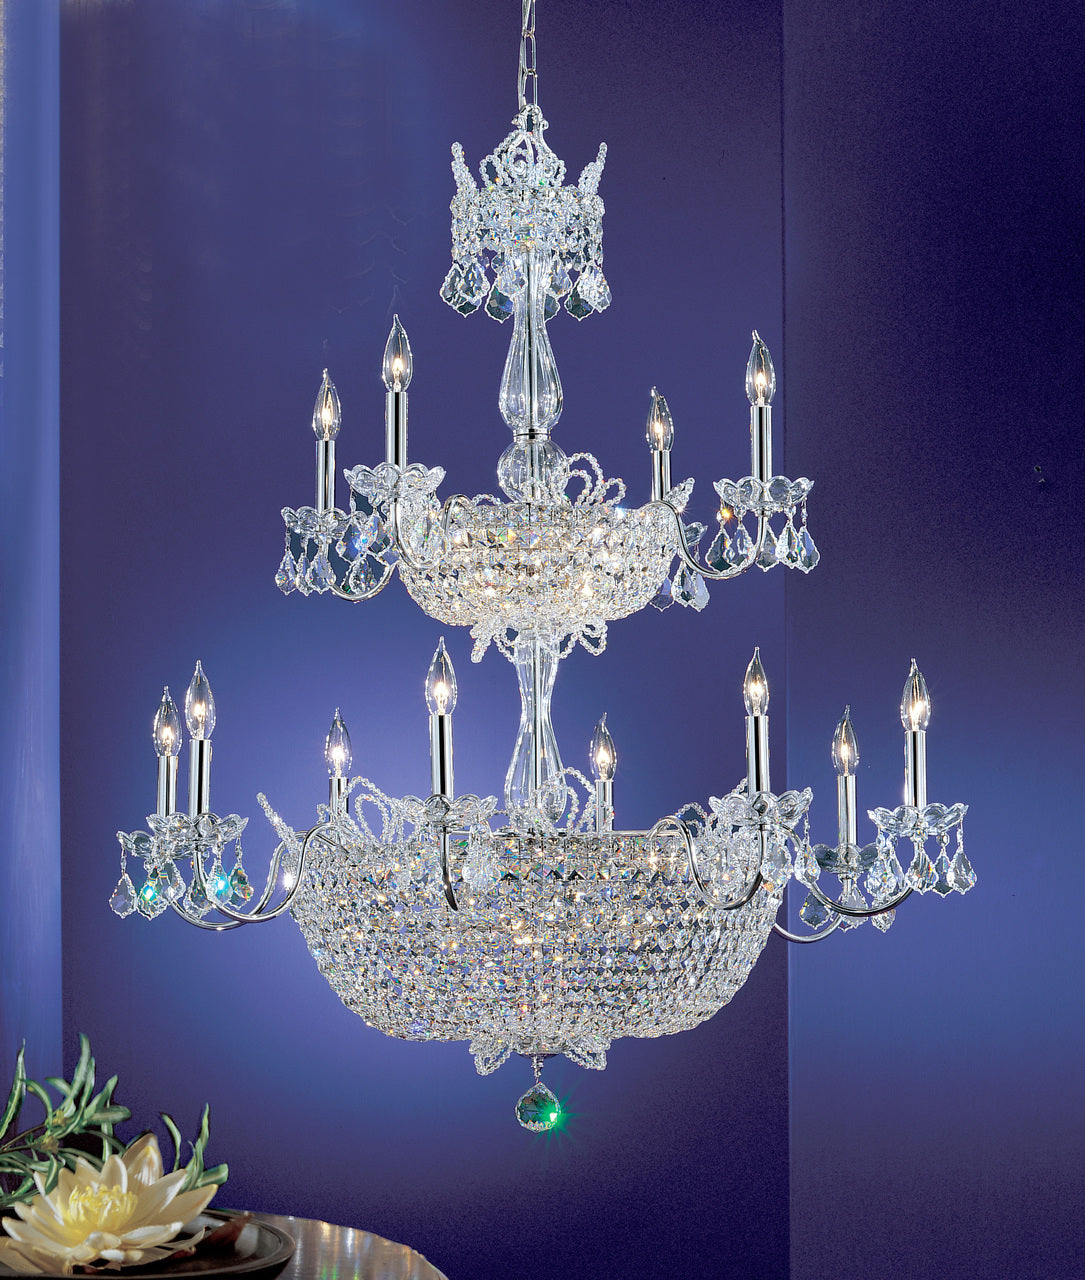 Classic Lighting 69789 CH SC Crown Jewels Crystal Chandelier in Chrome